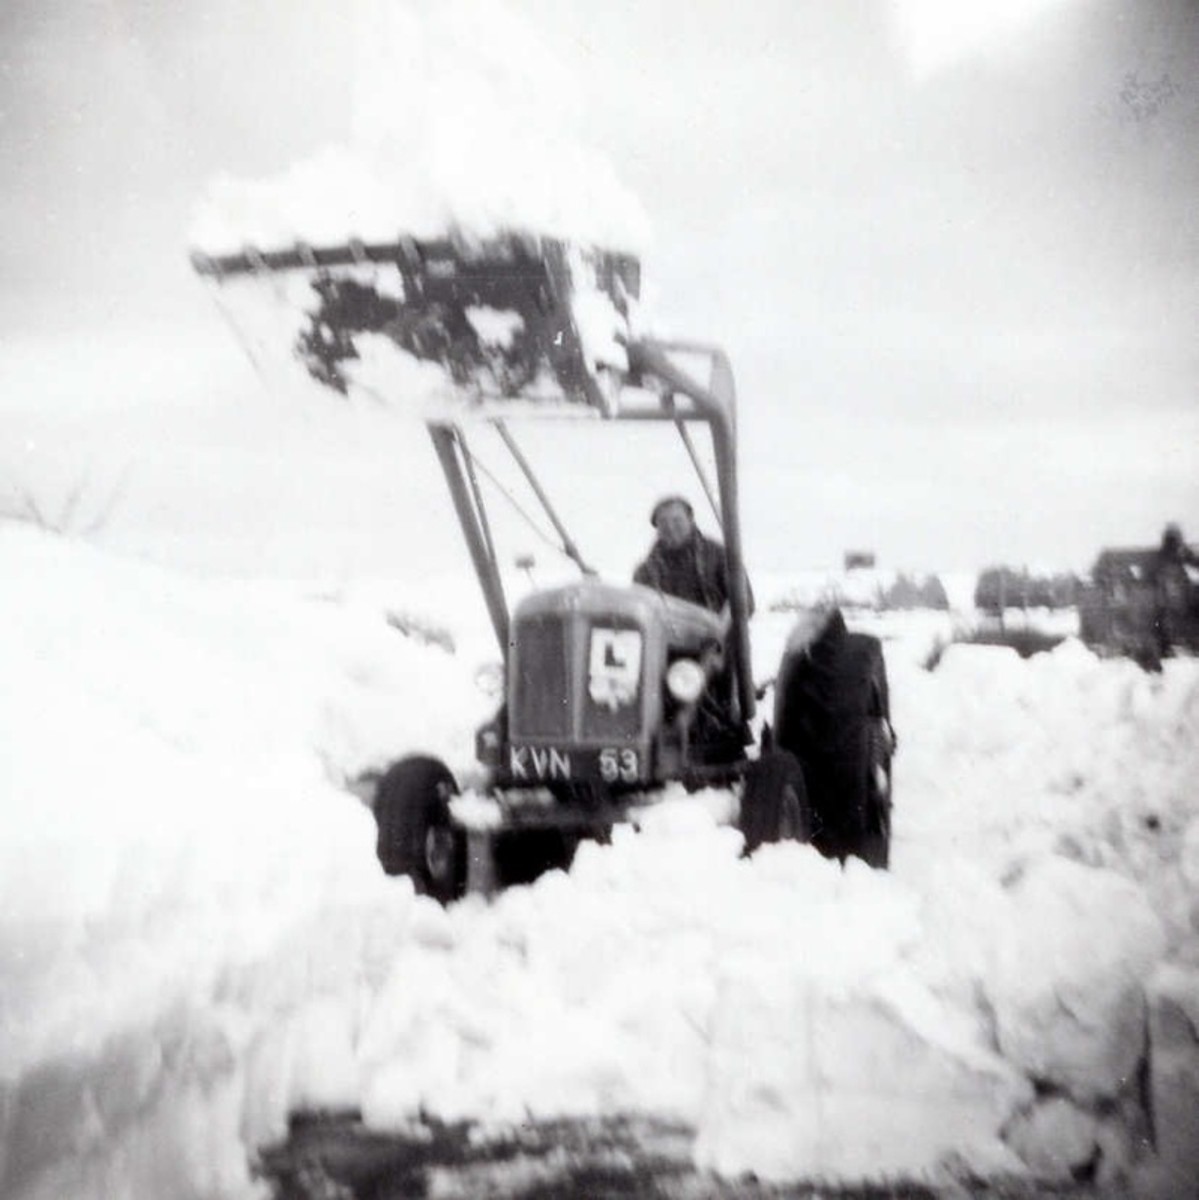 A tractor at Loftus in East Cleveland (North Yorkshire) getting to grips with stuck vehicles, 1963